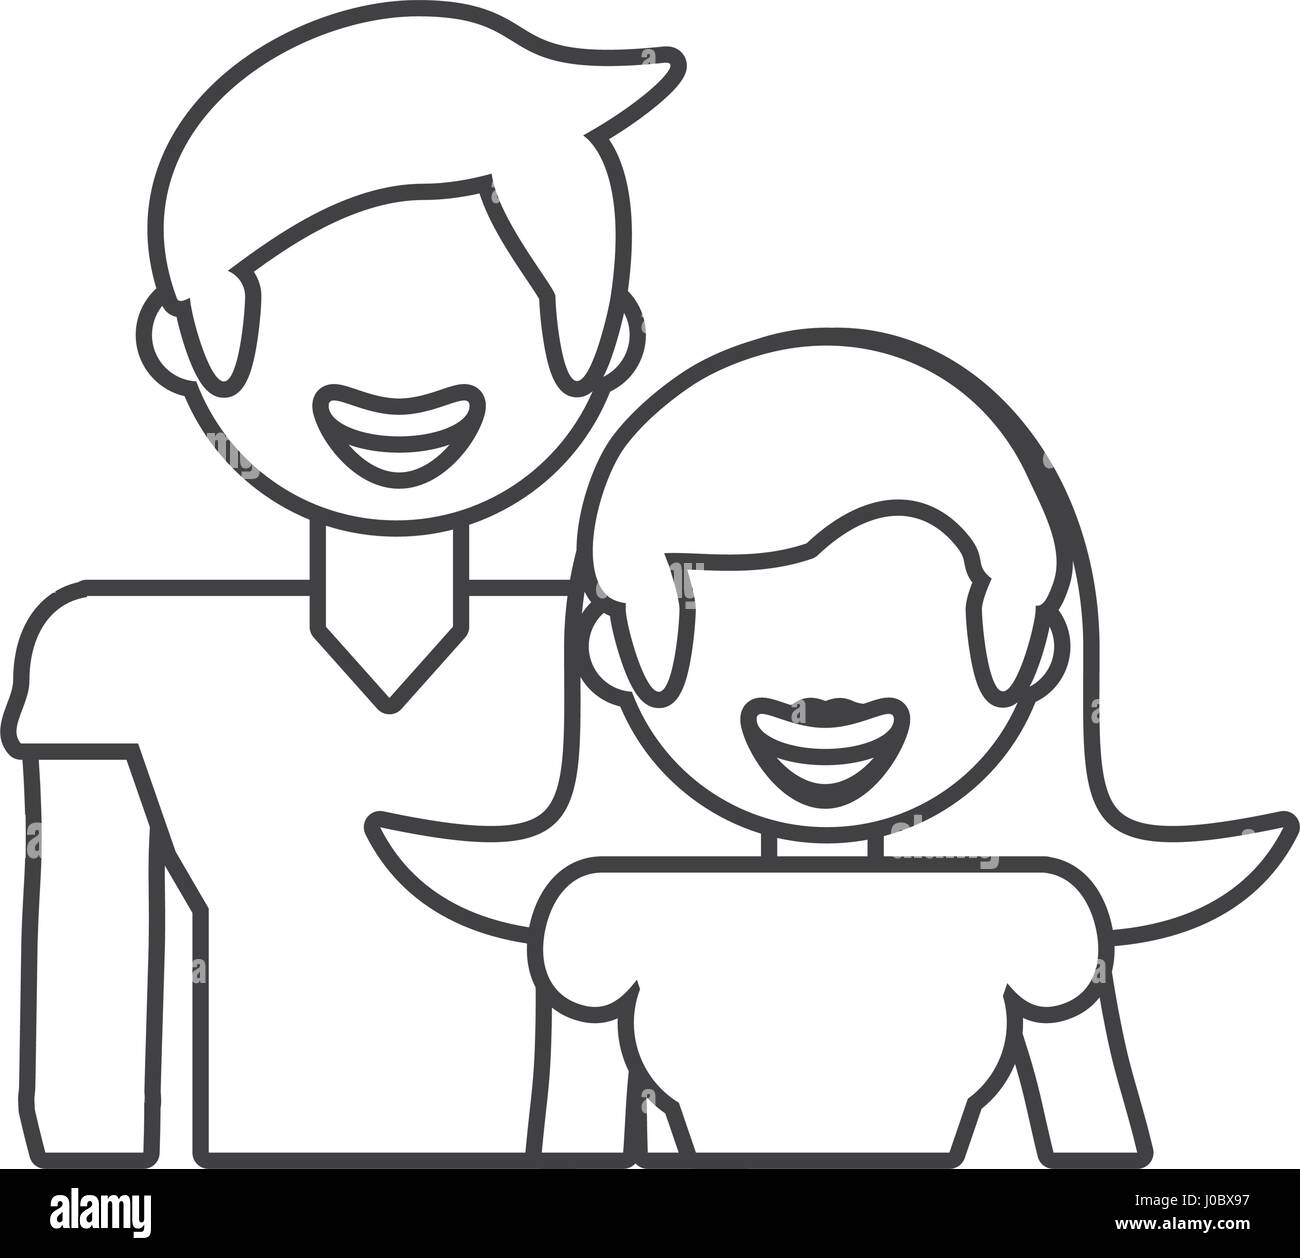 Two People Togetherness Stock Vector Images - Alamy